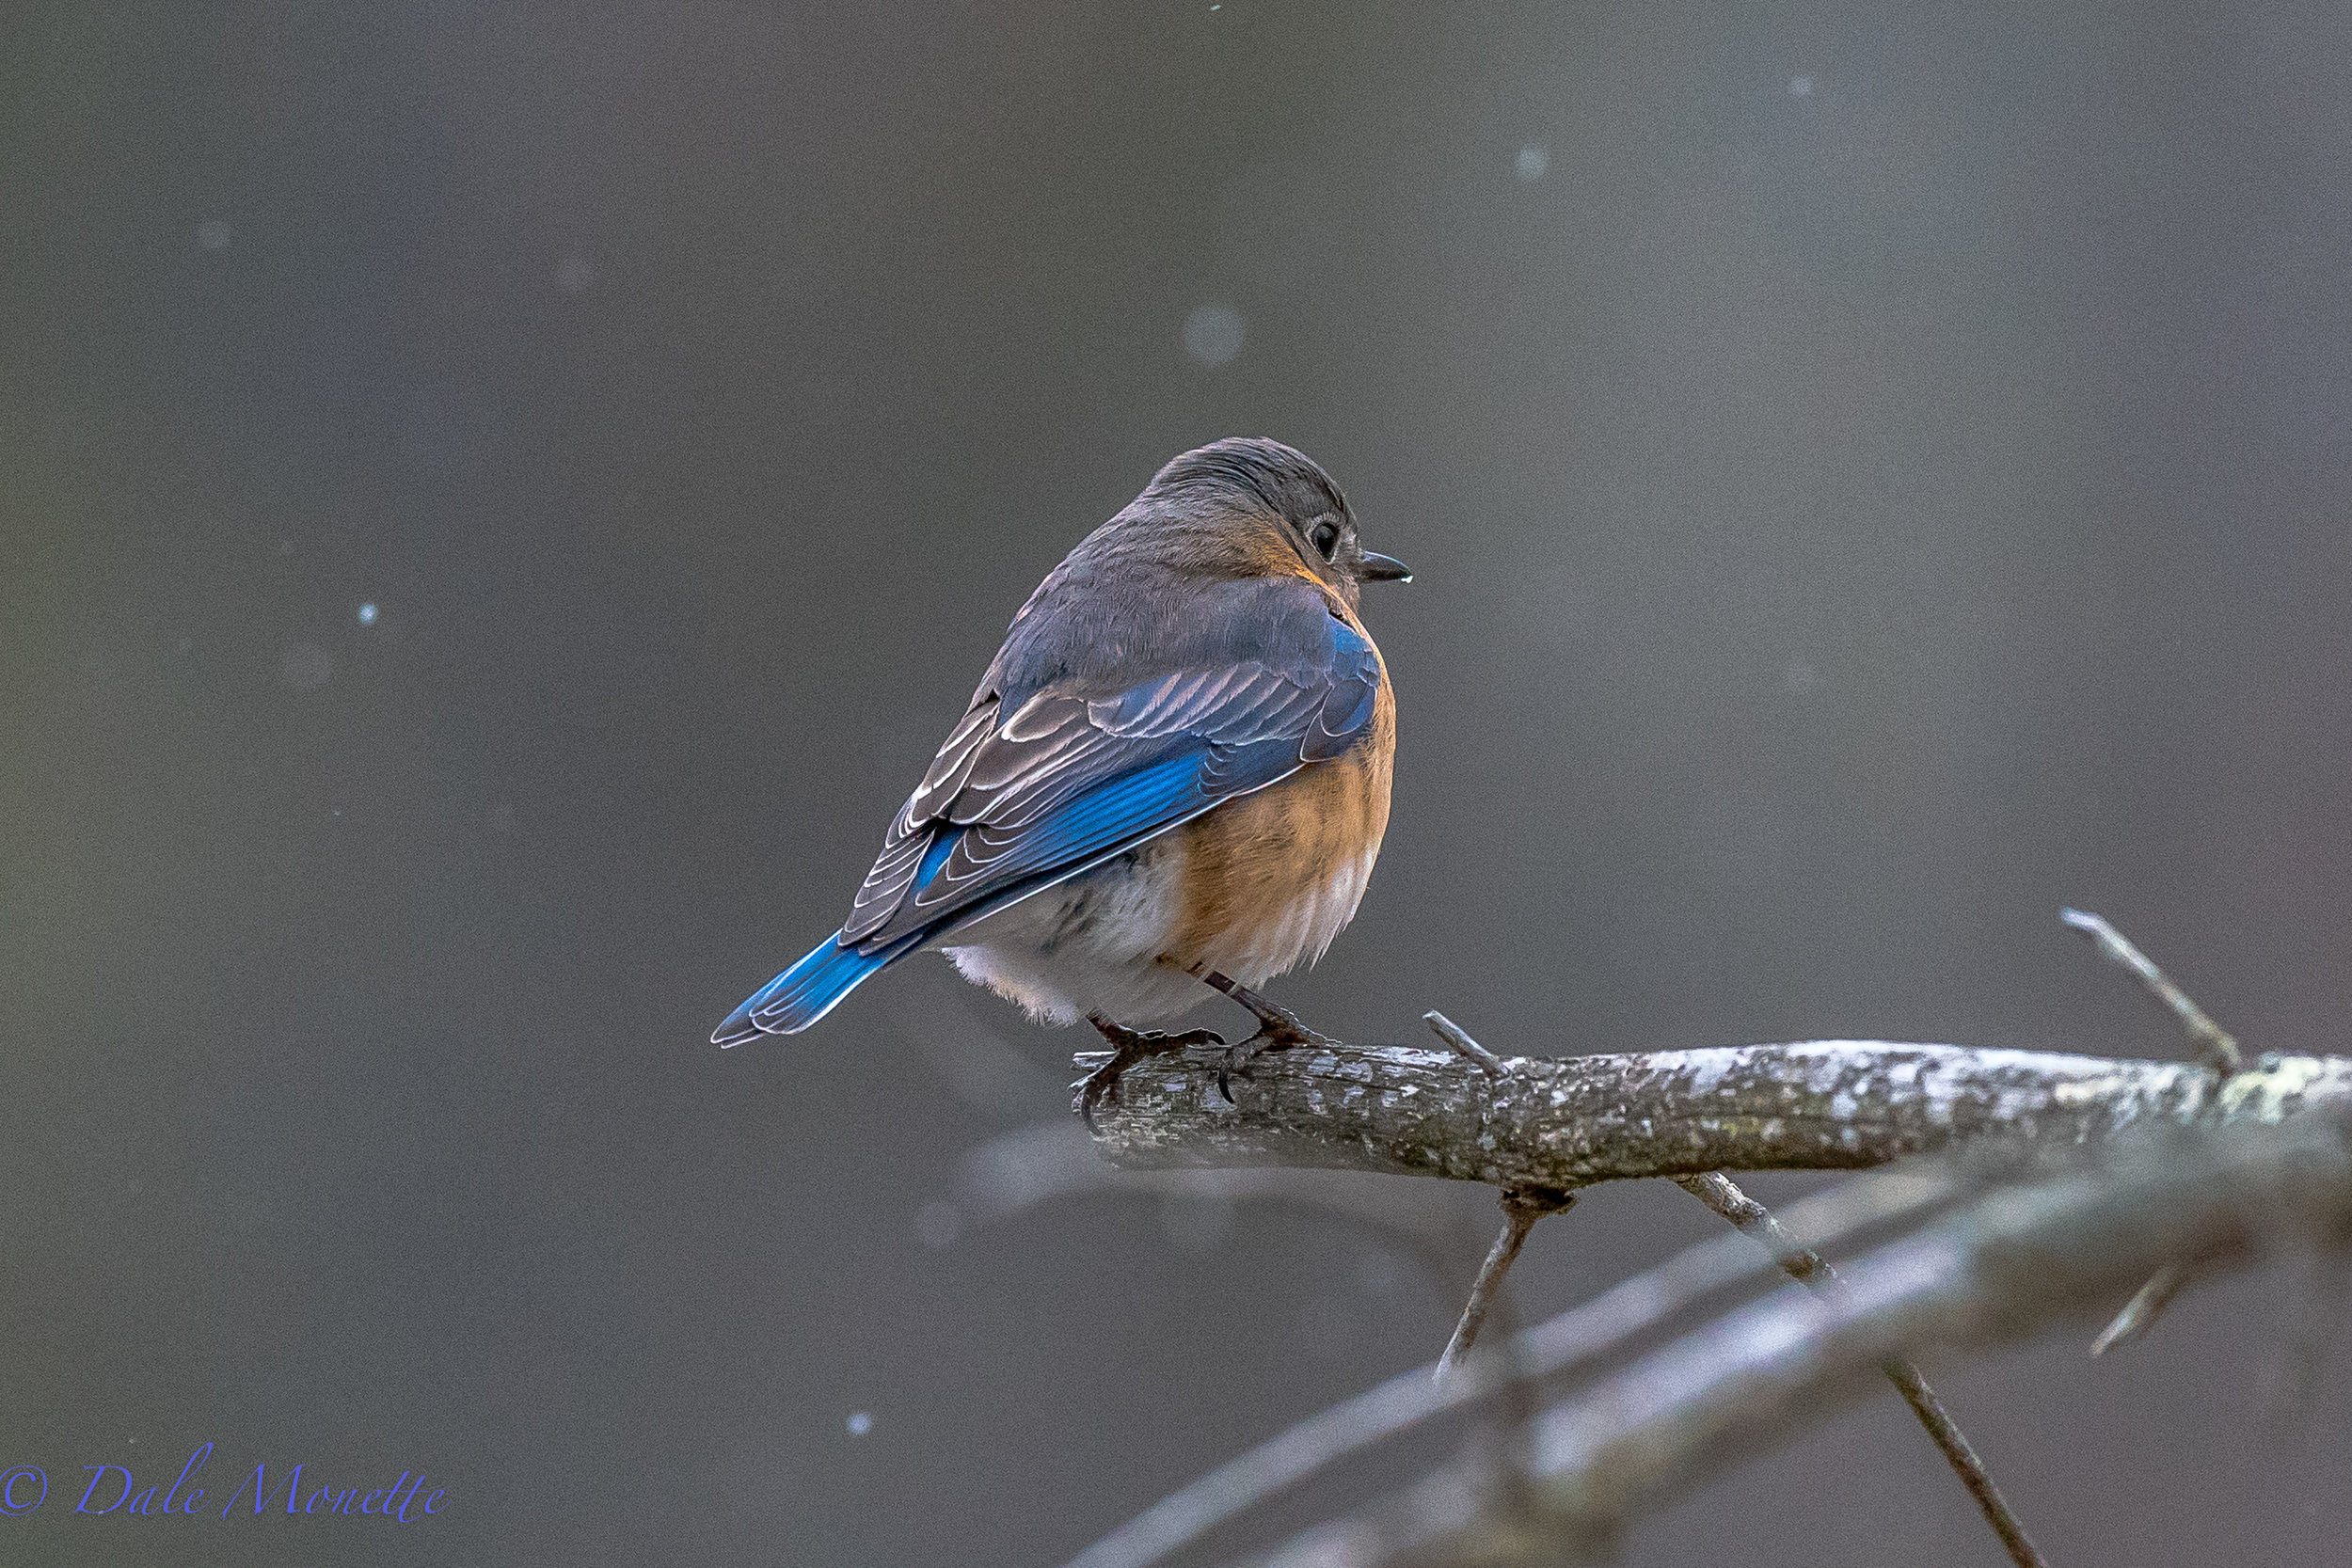   A female bluebird landed right smack in front of me in with little snow falling. &nbsp;3/10/17  